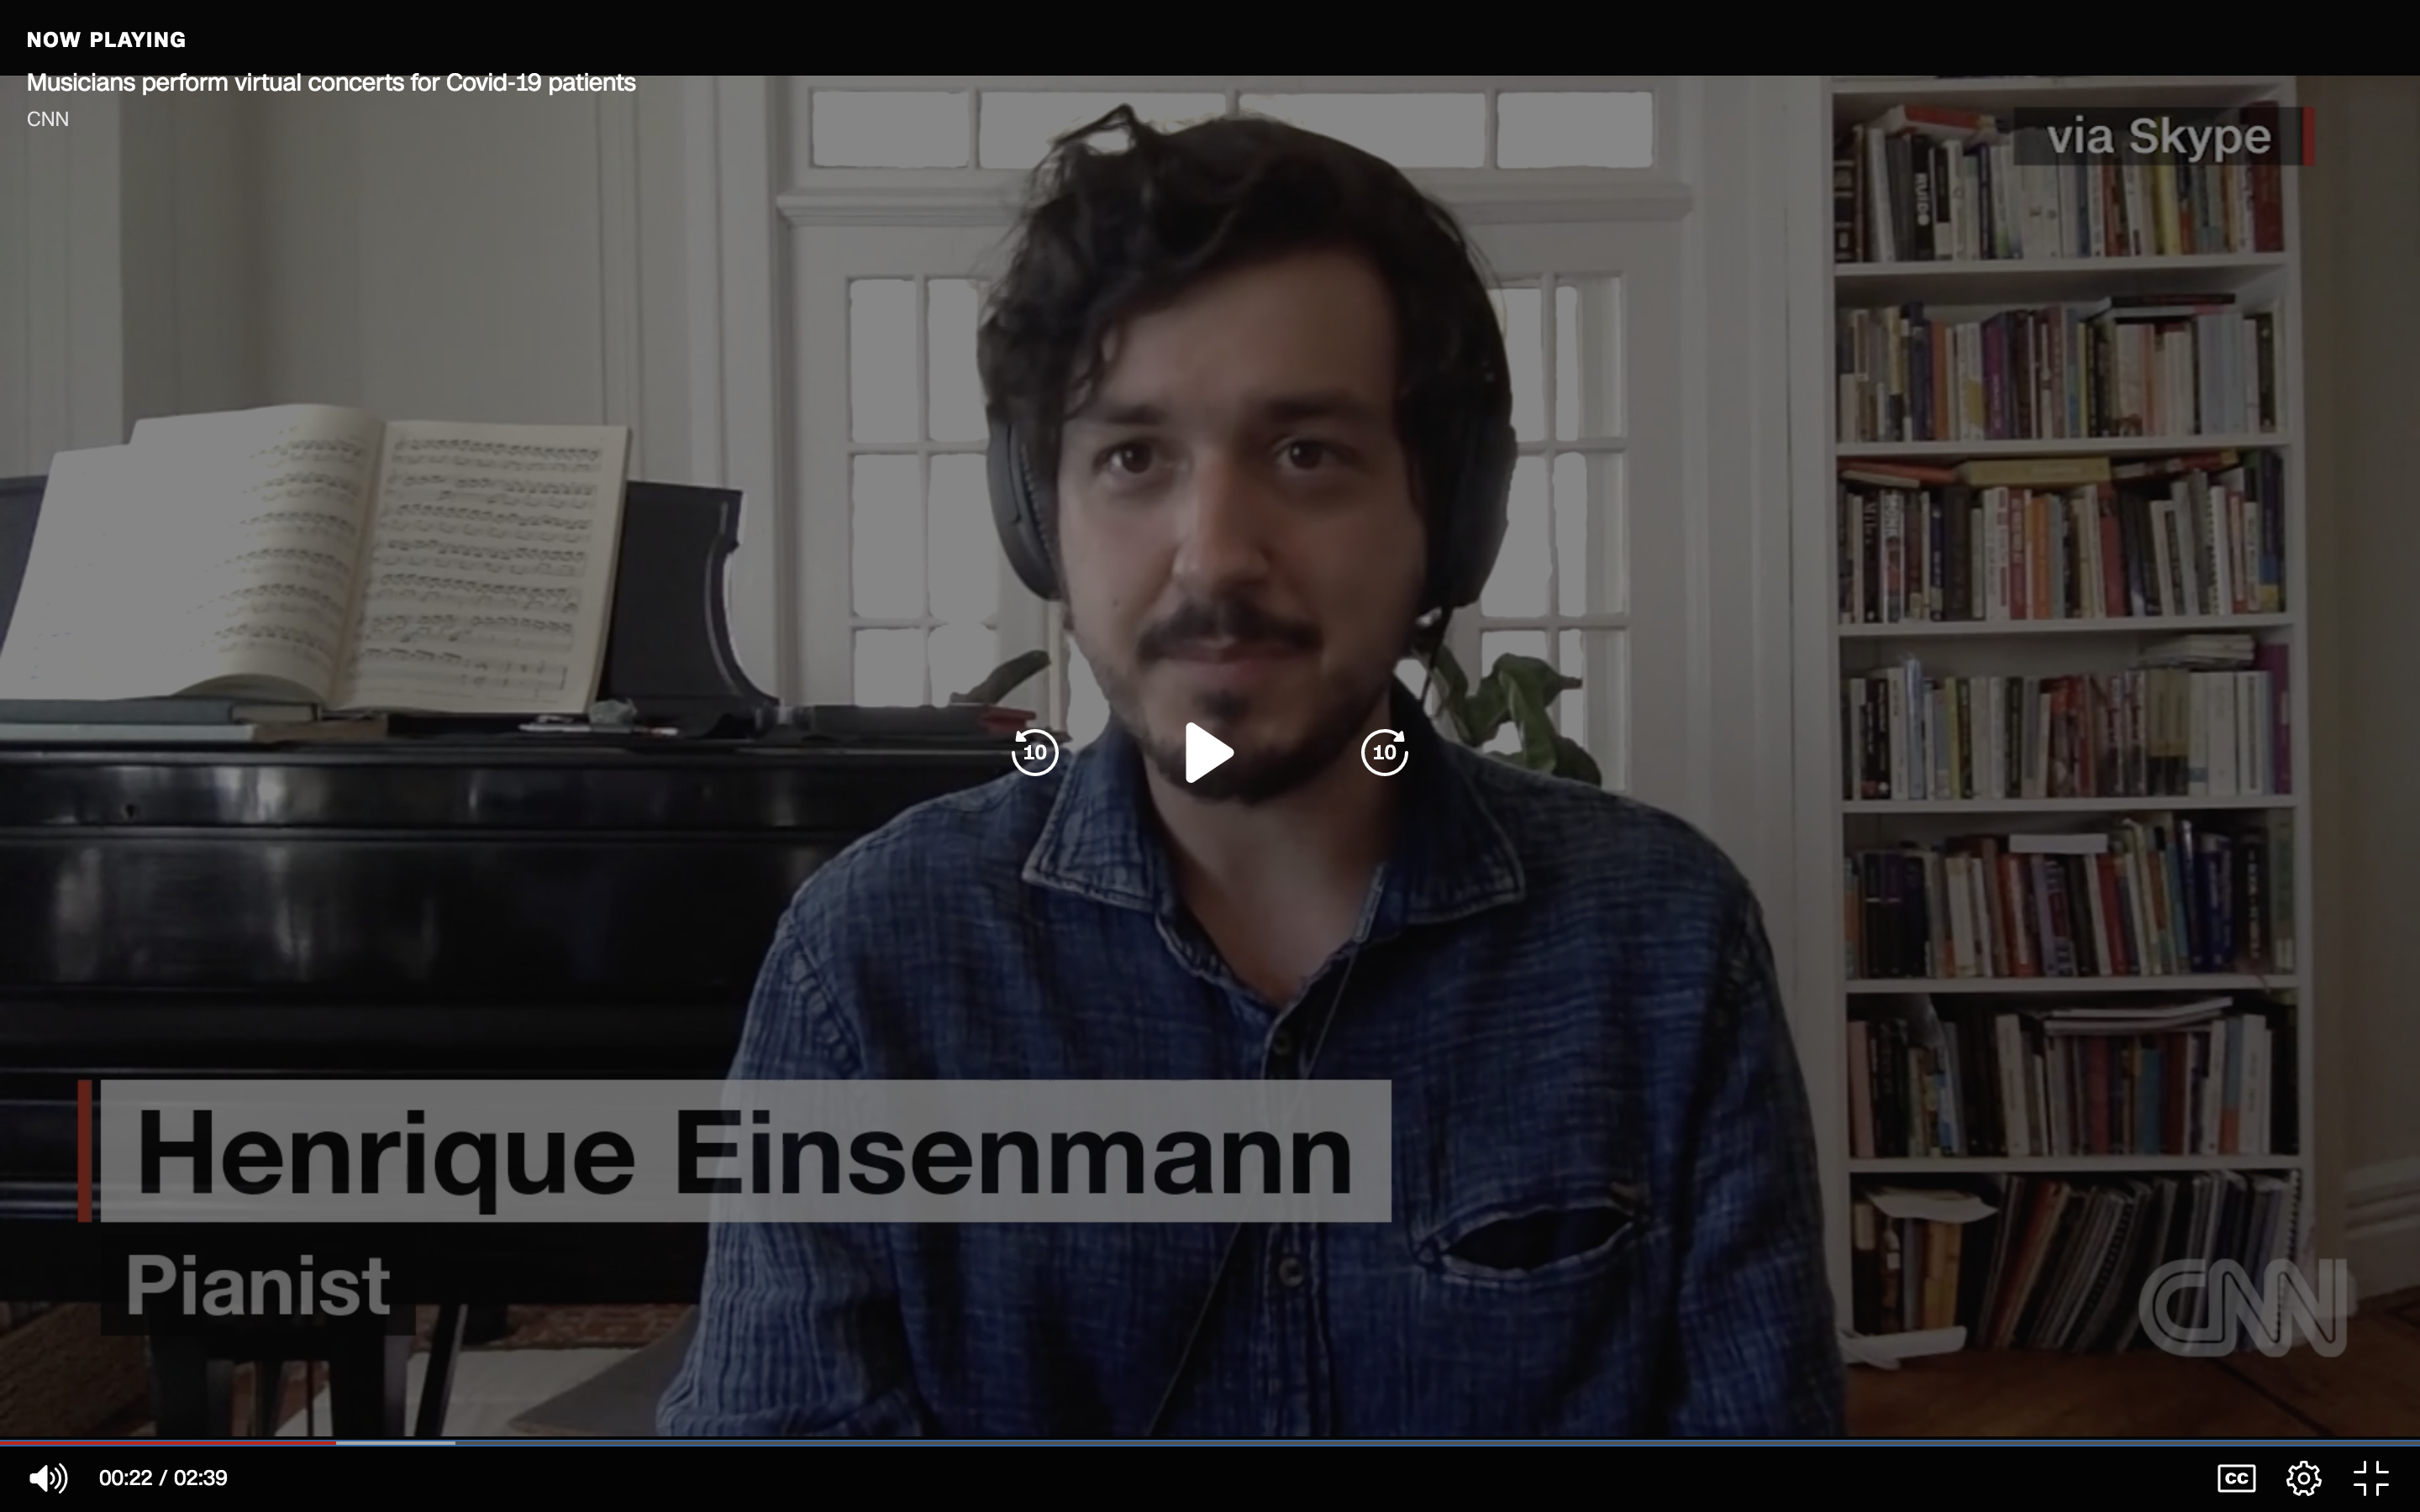 Henrique Eisenmann, pianist, speaks to CNN from his home, with a piano and bookshelf in the background